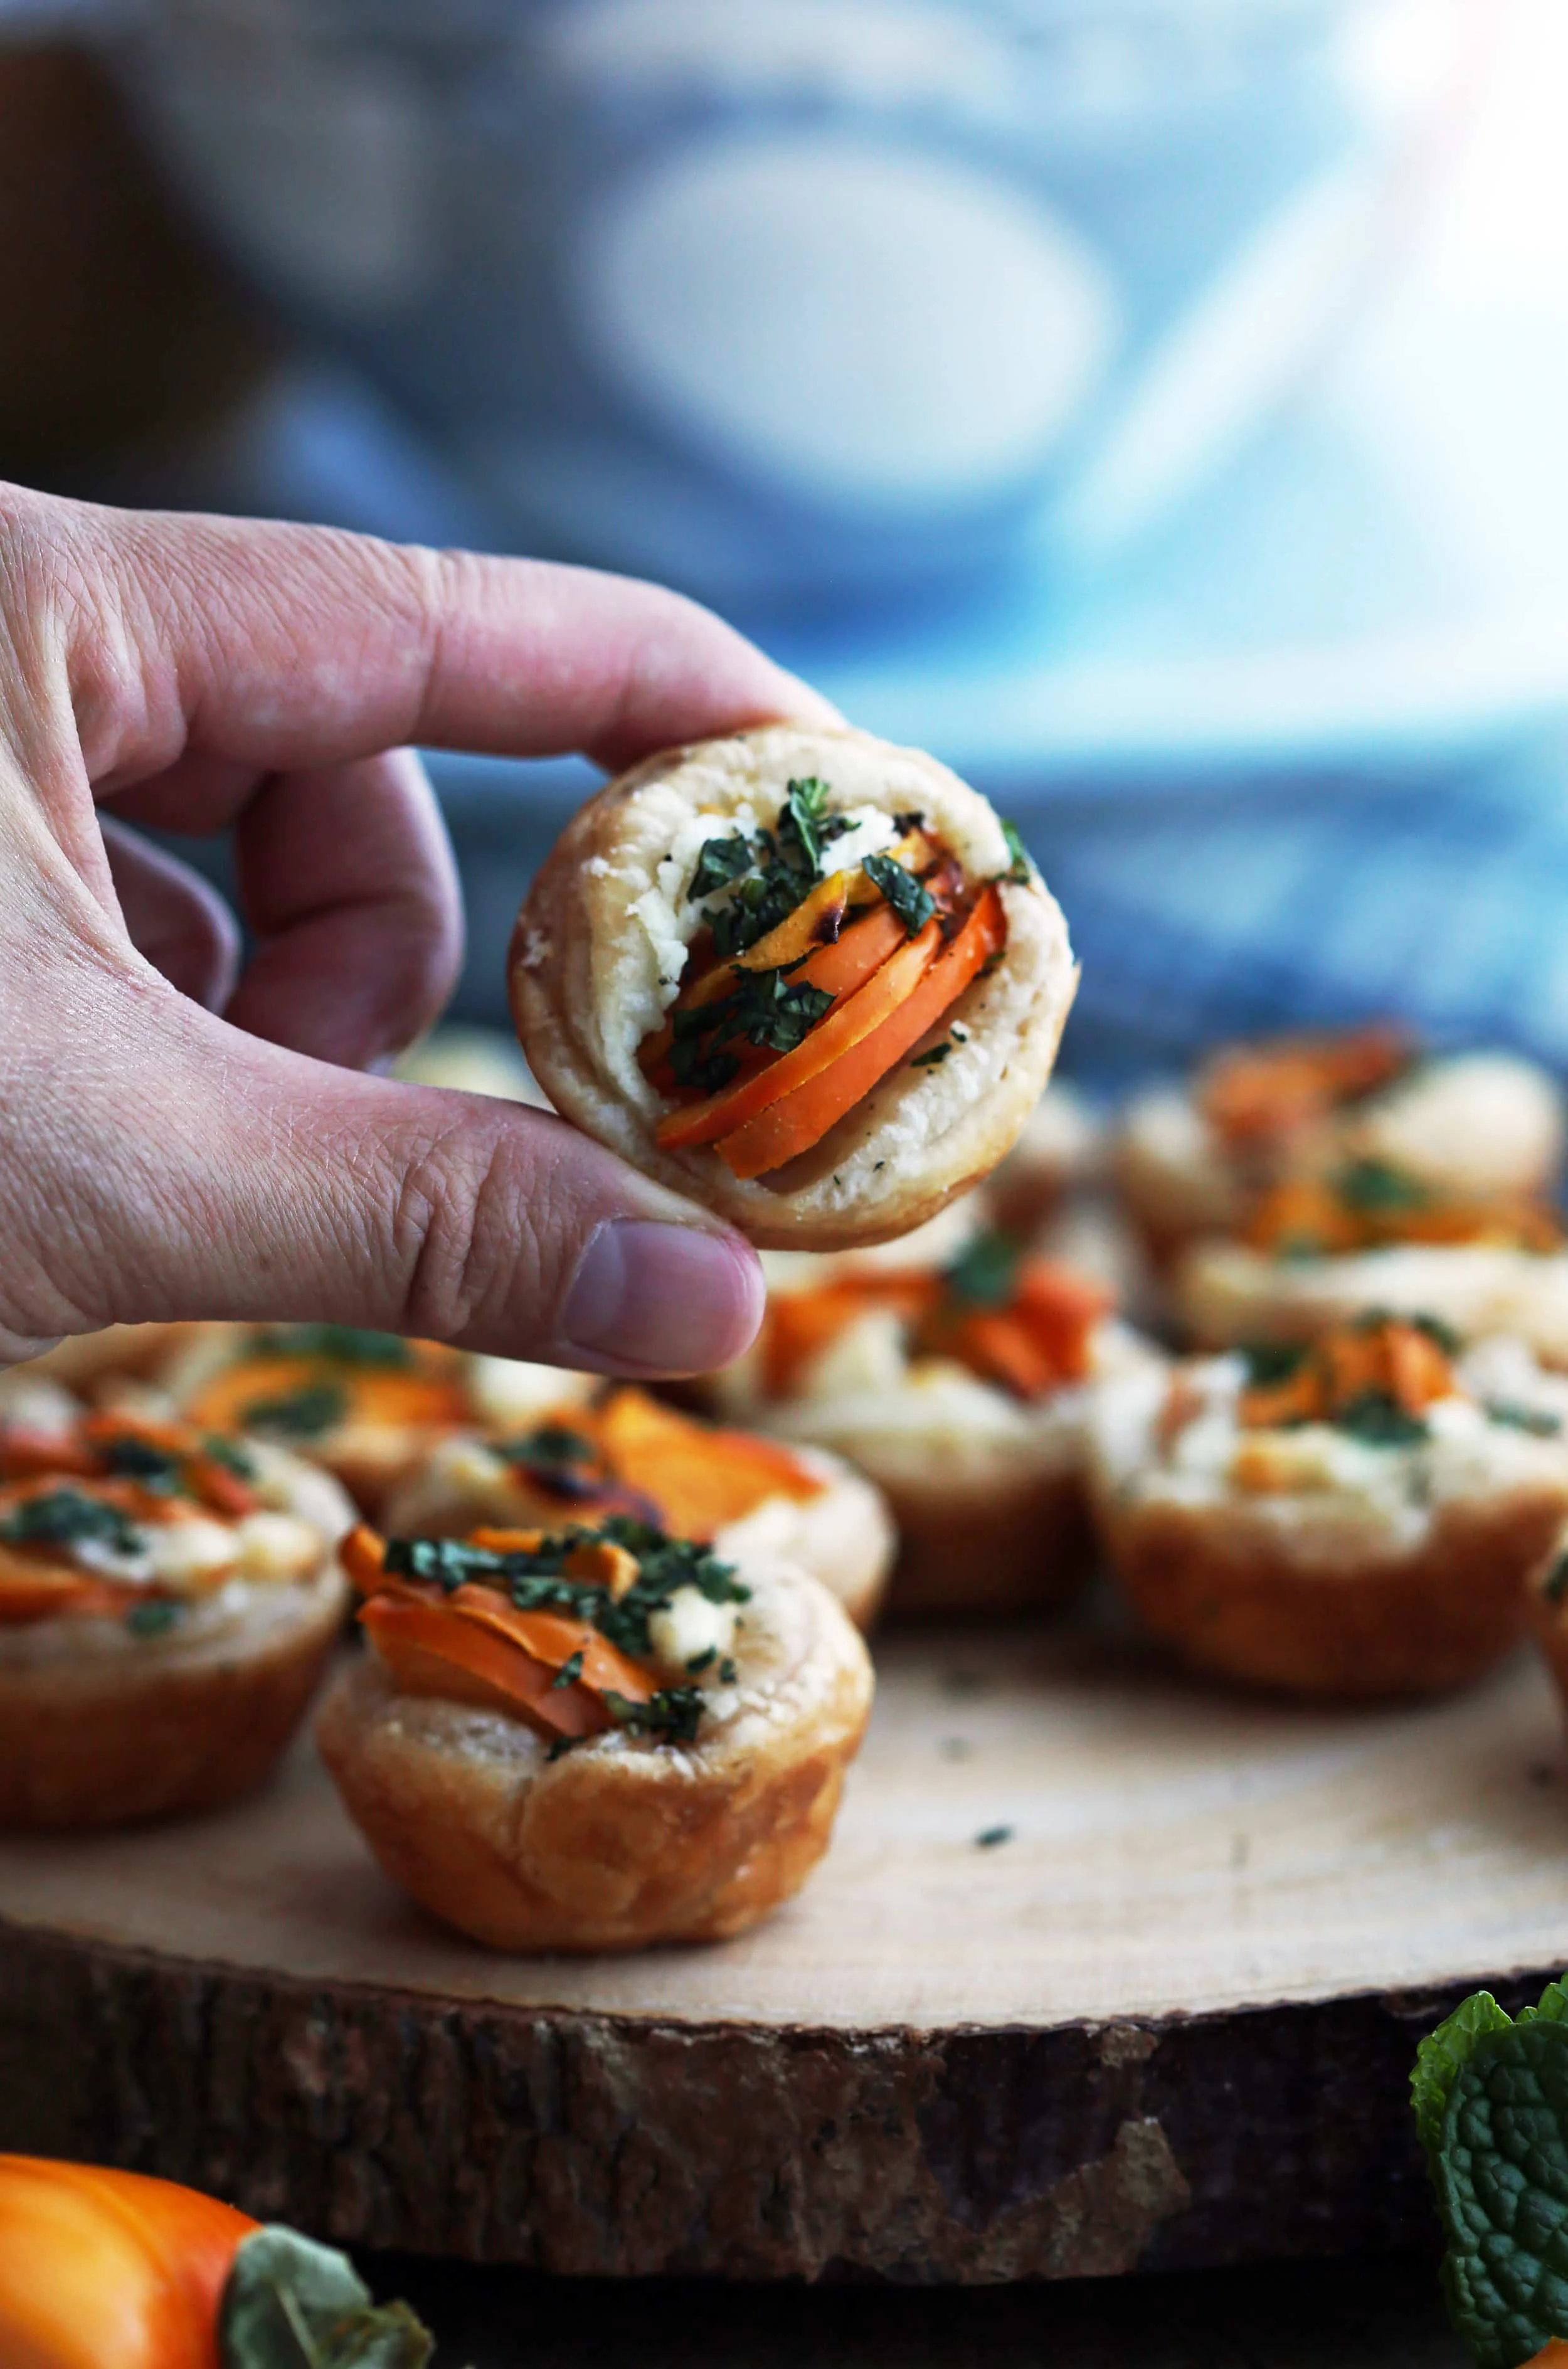 A hand holding a single Persimmon Goat Cheese Tartlet over a wooden platter full of more tartlets.